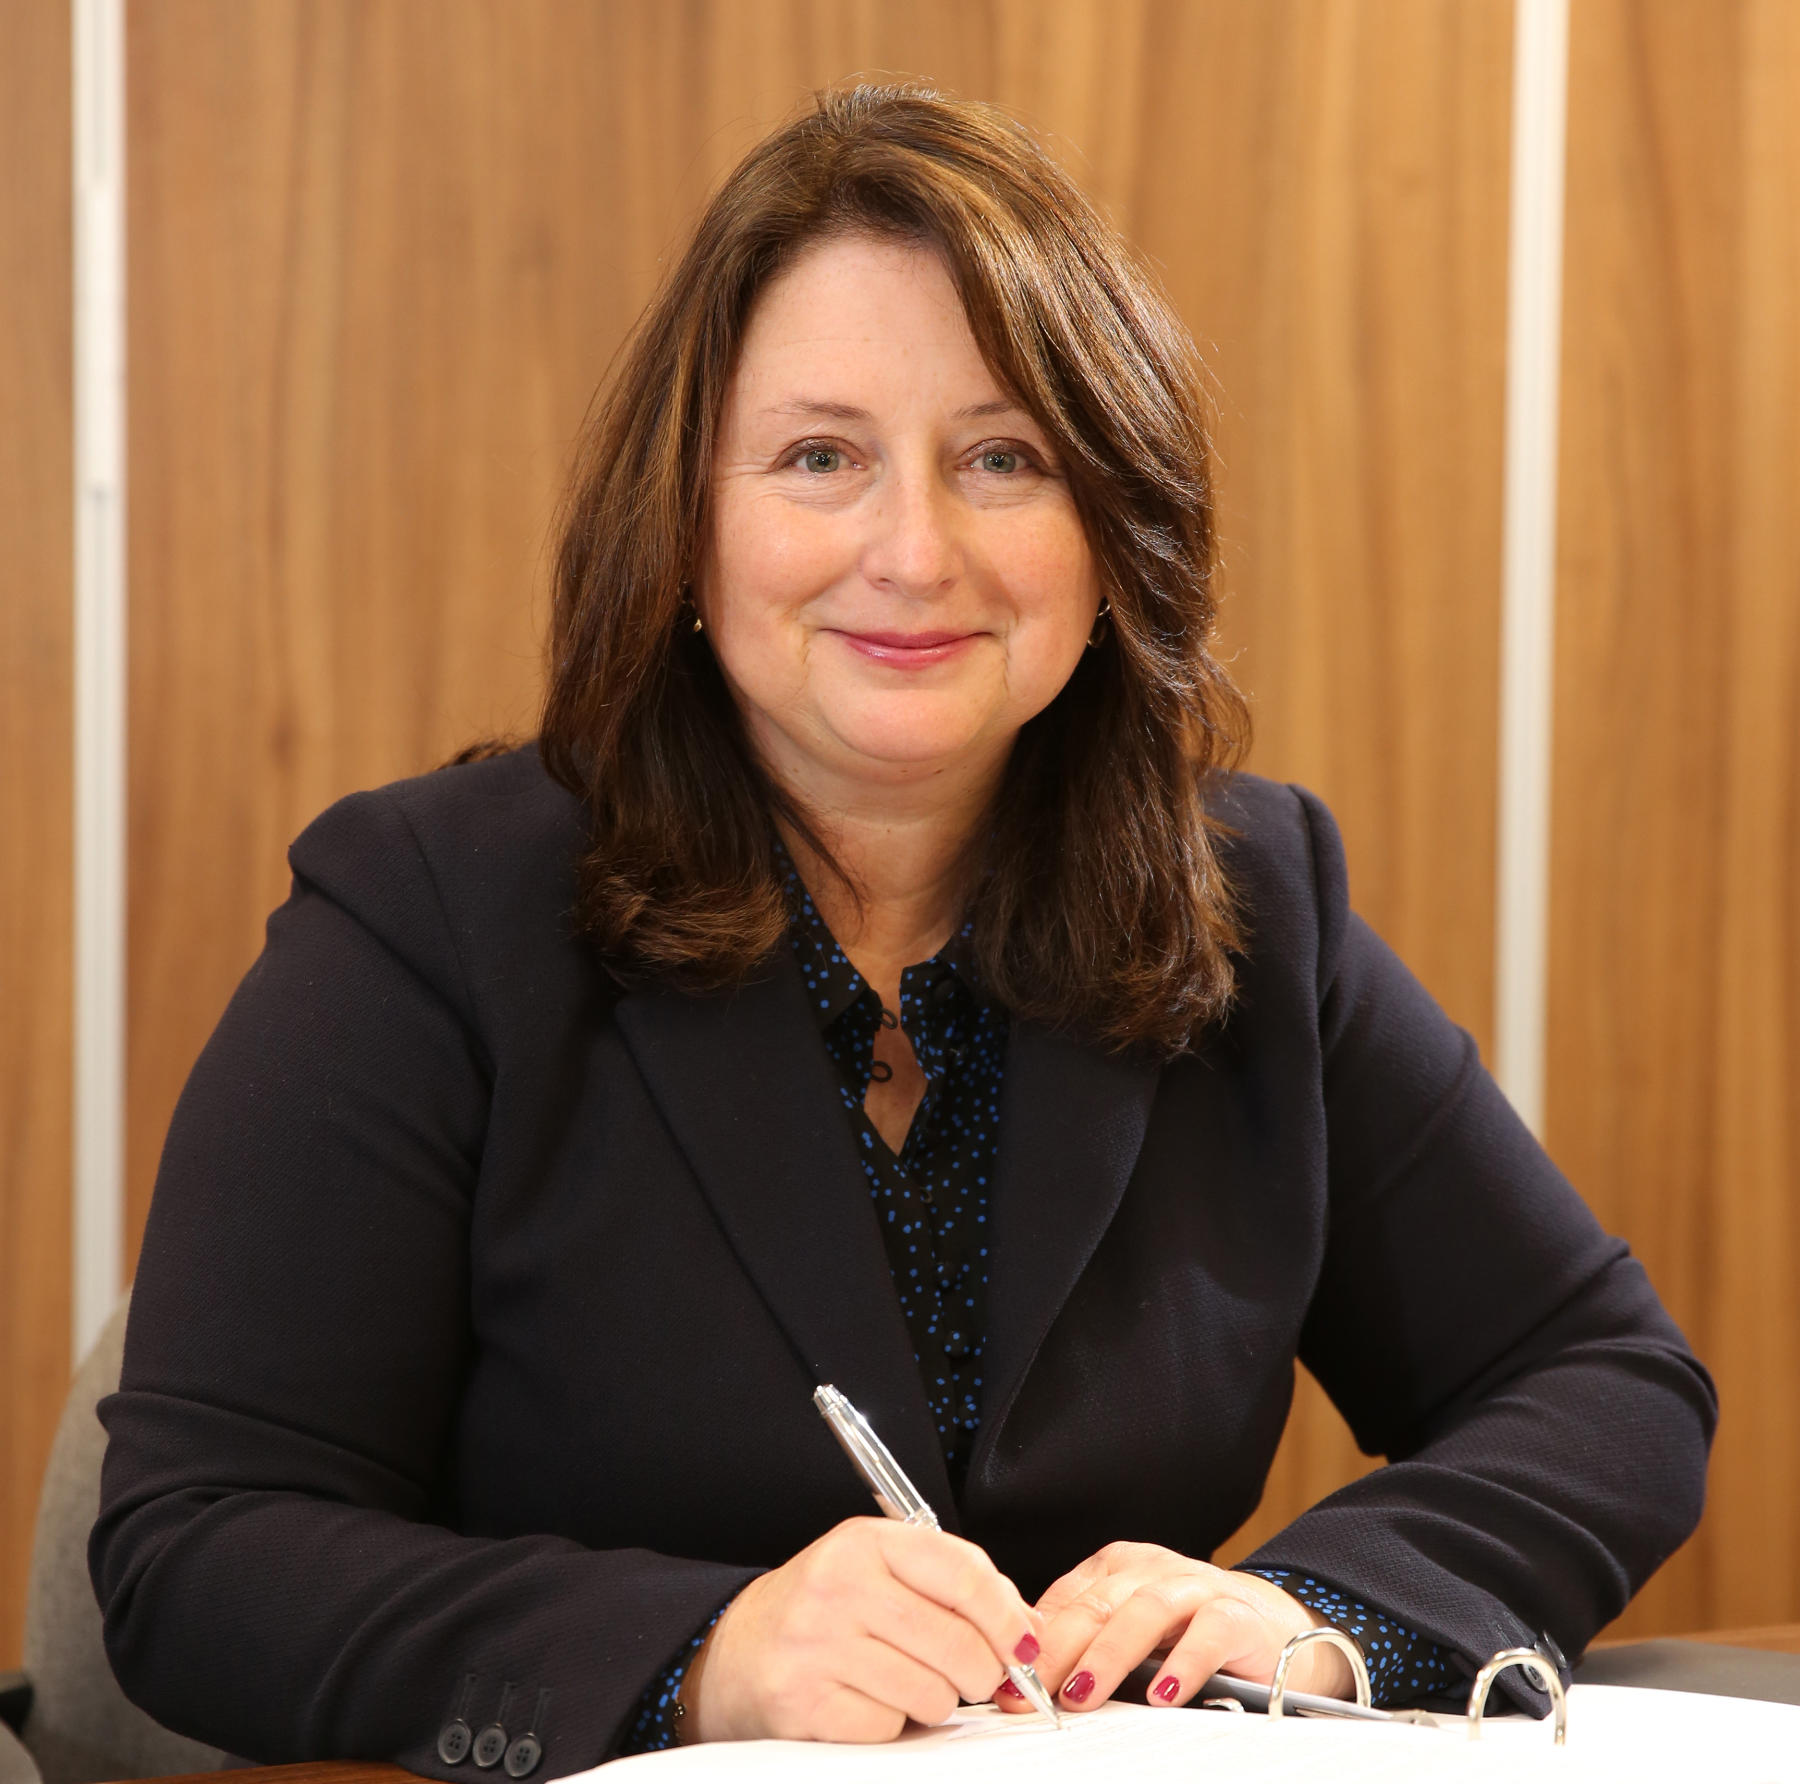 North Yorkshire’s Police, Fire and Crime Commissioner, Zoë Metcalfe